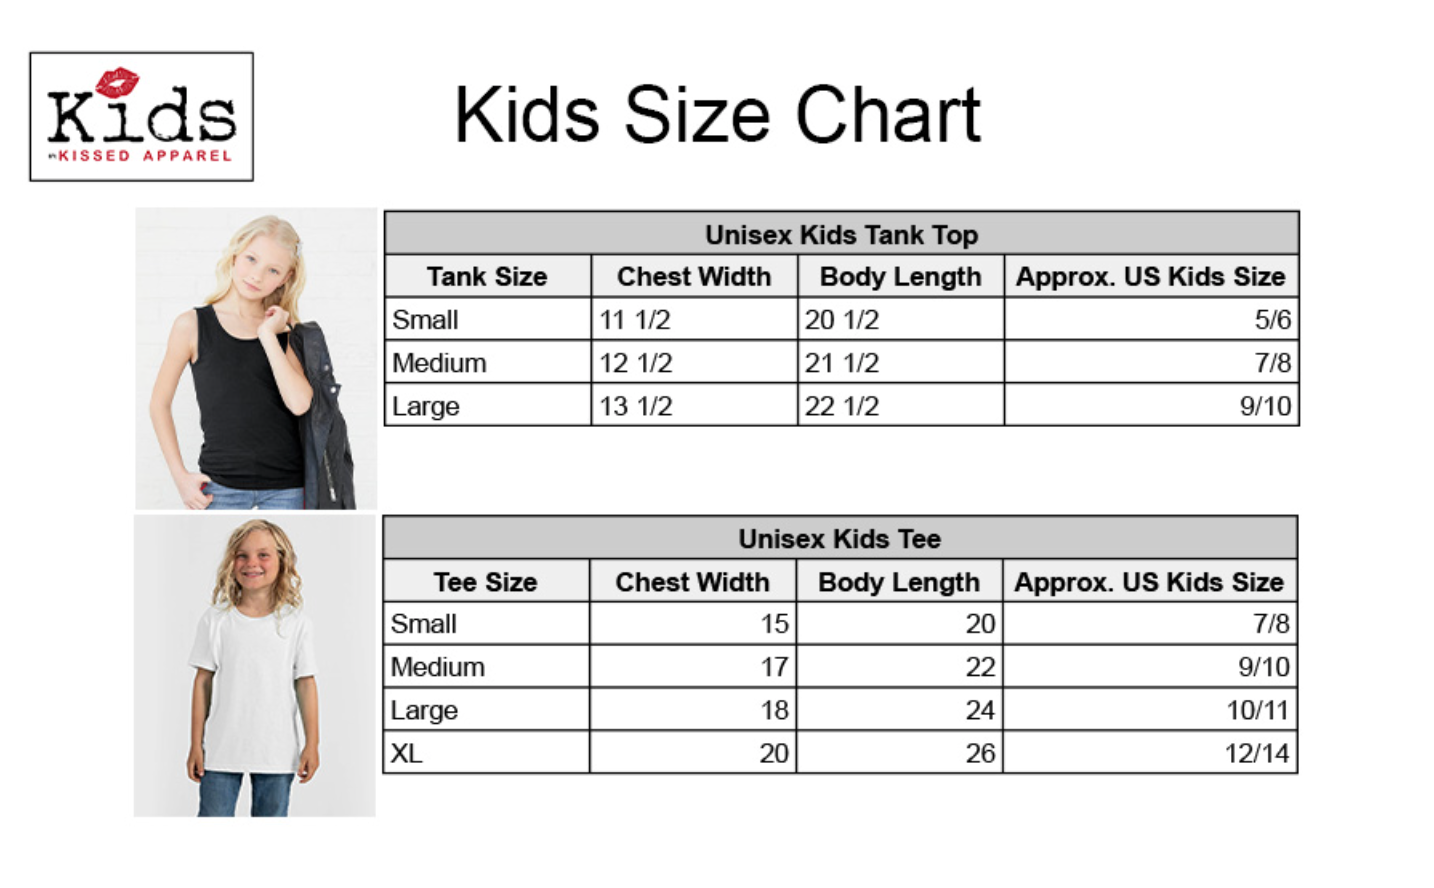 Silly Smart Unique Me Kids Graphic Tee (Final Sale)